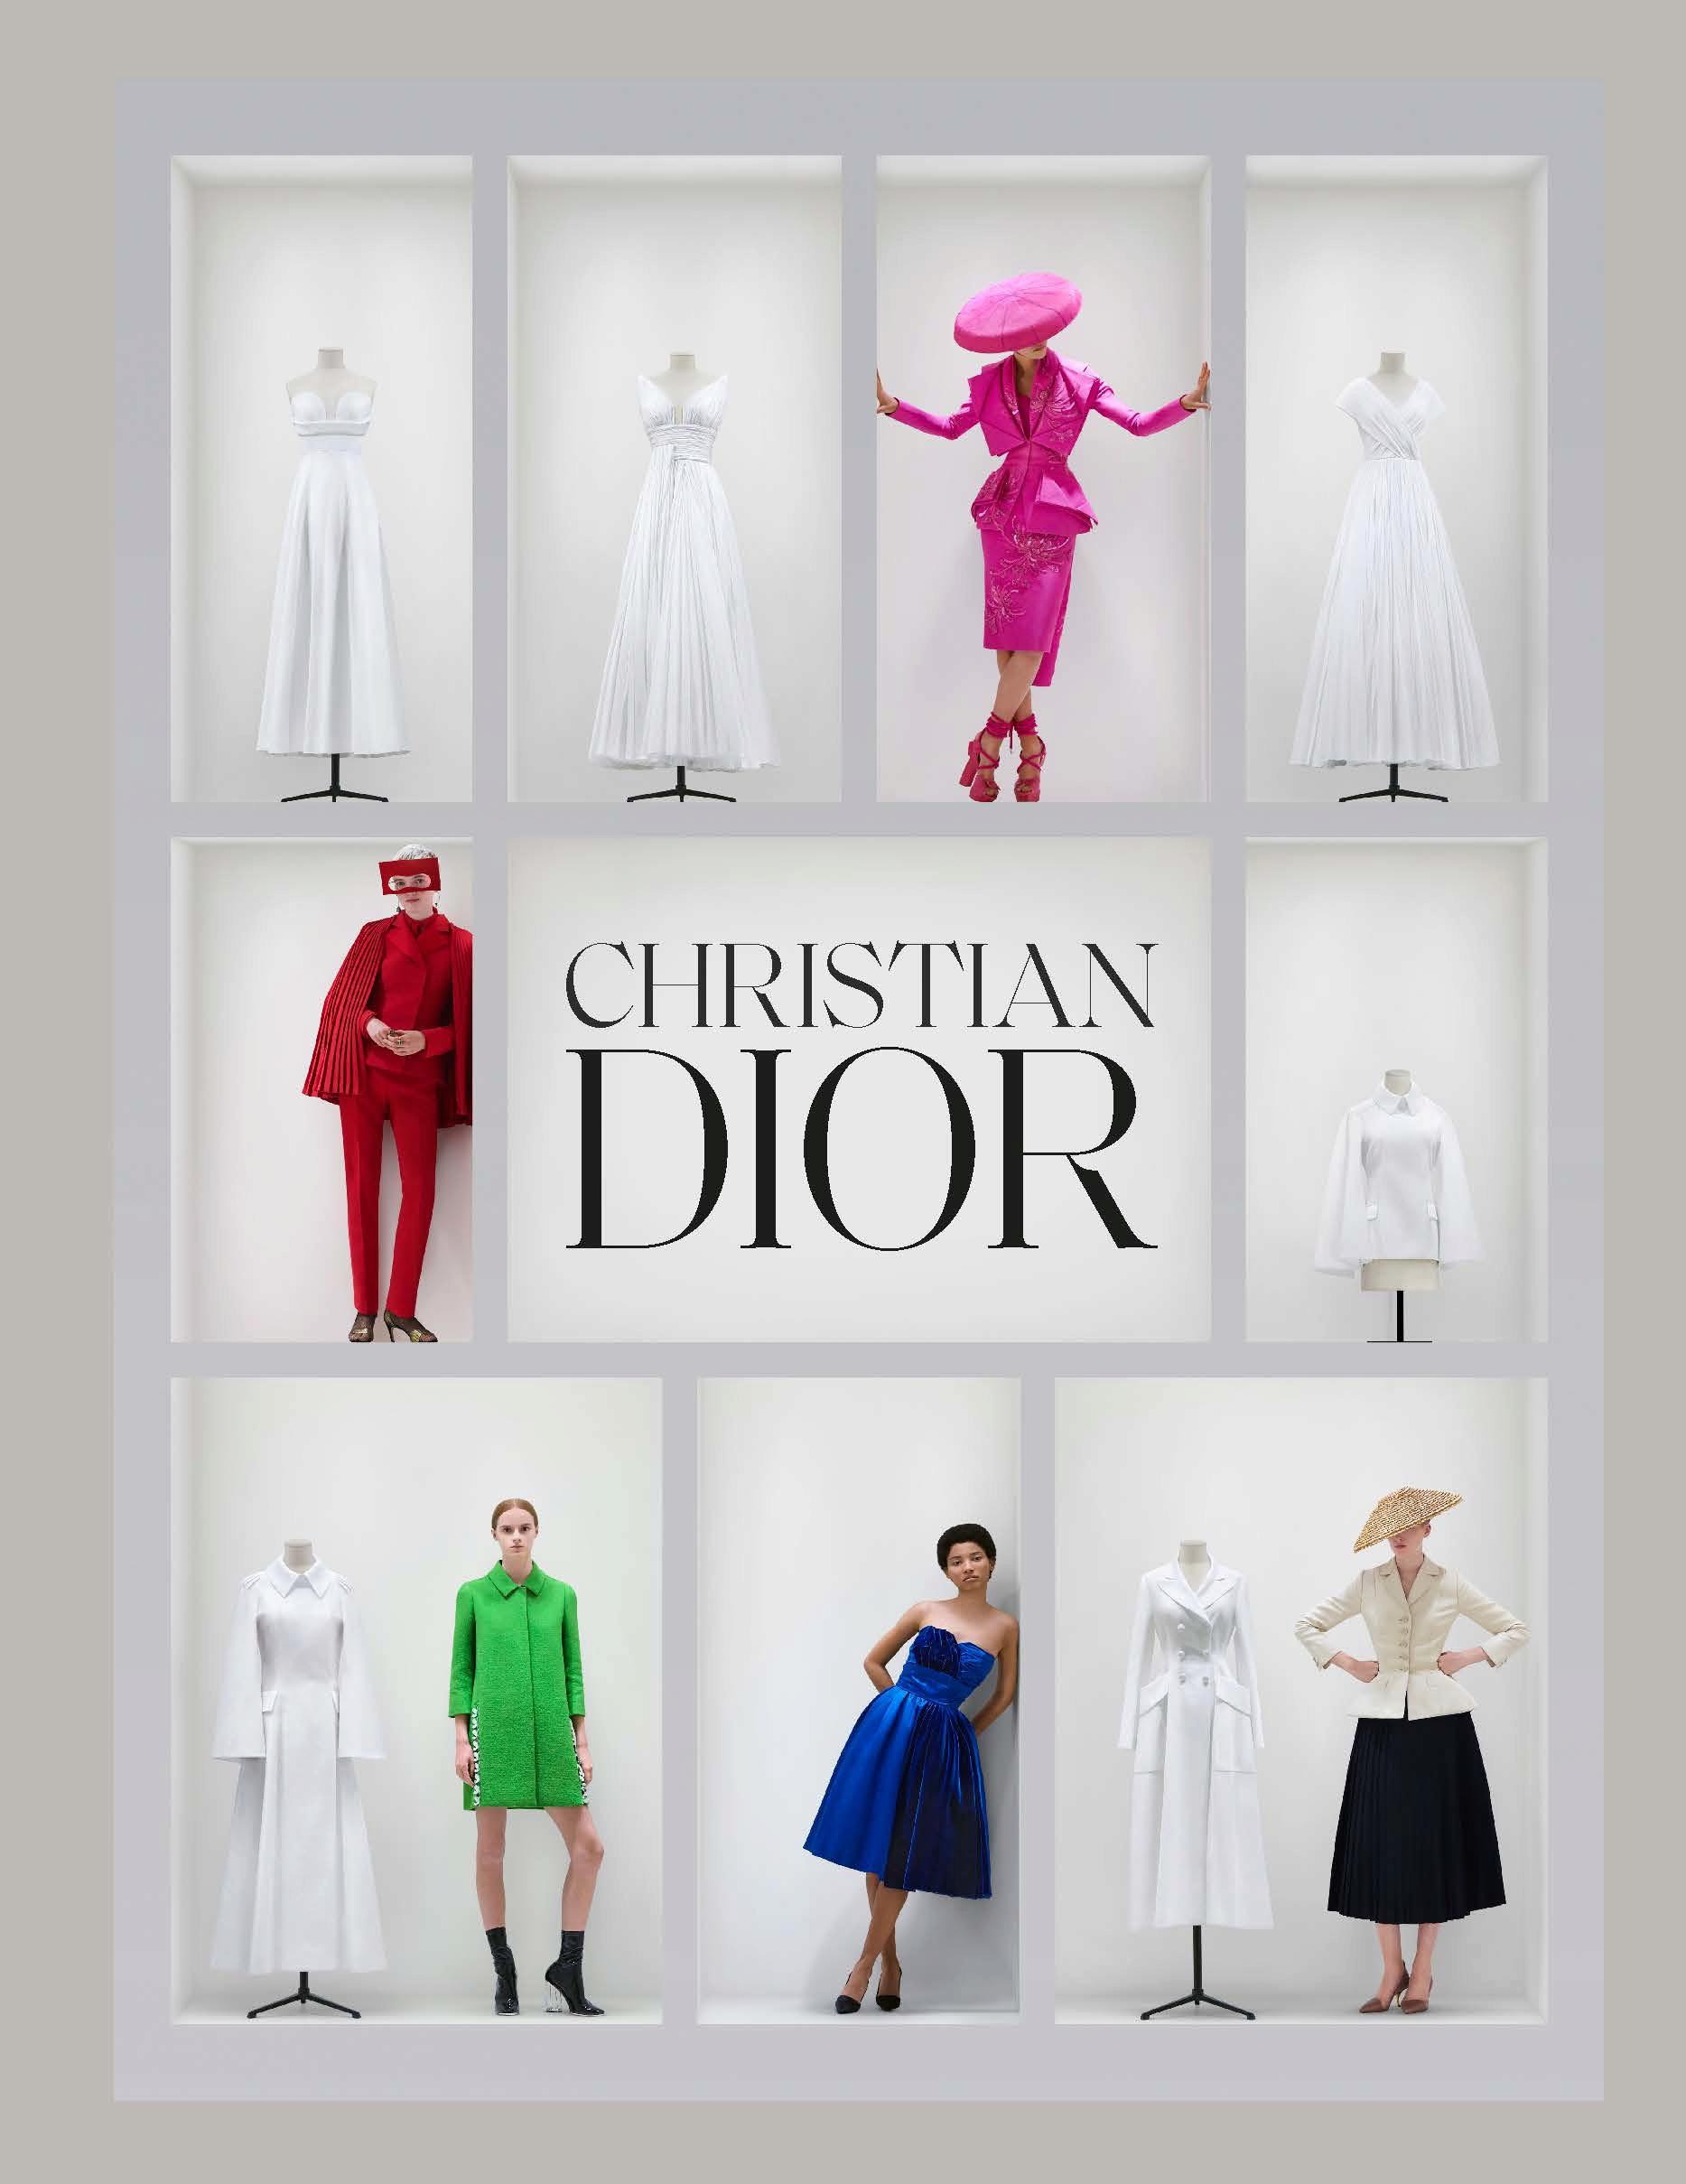 Christian Dior by Oriolle Cullen